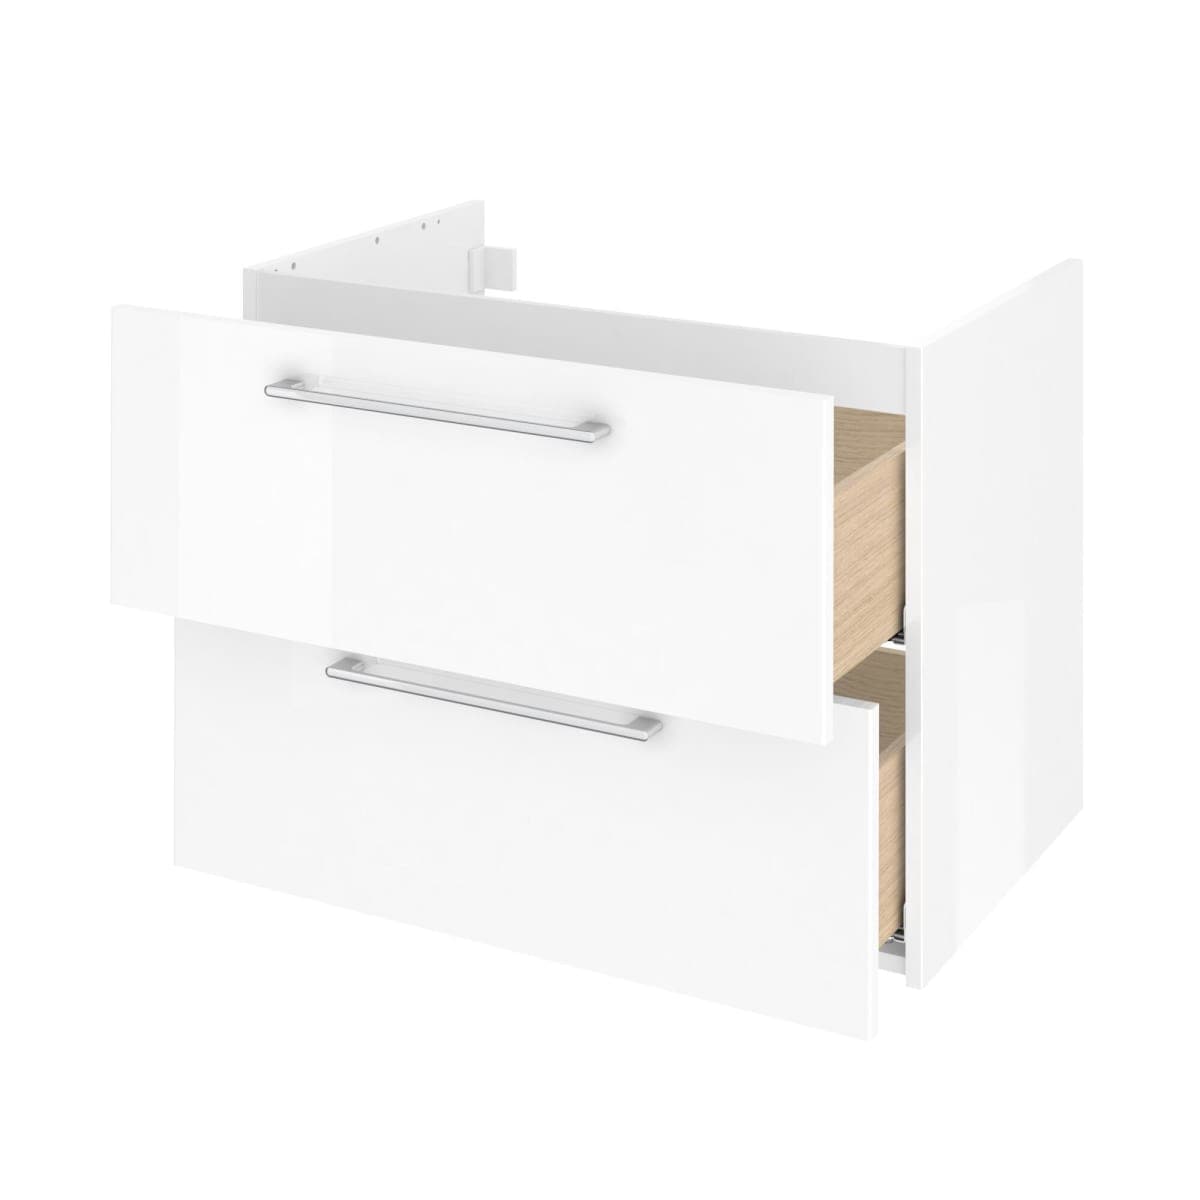 CABINET REMIX 75 2 DRAWERS GLOSSY WHITE W75 H58 D46 CM - best price from Maltashopper.com BR430008720